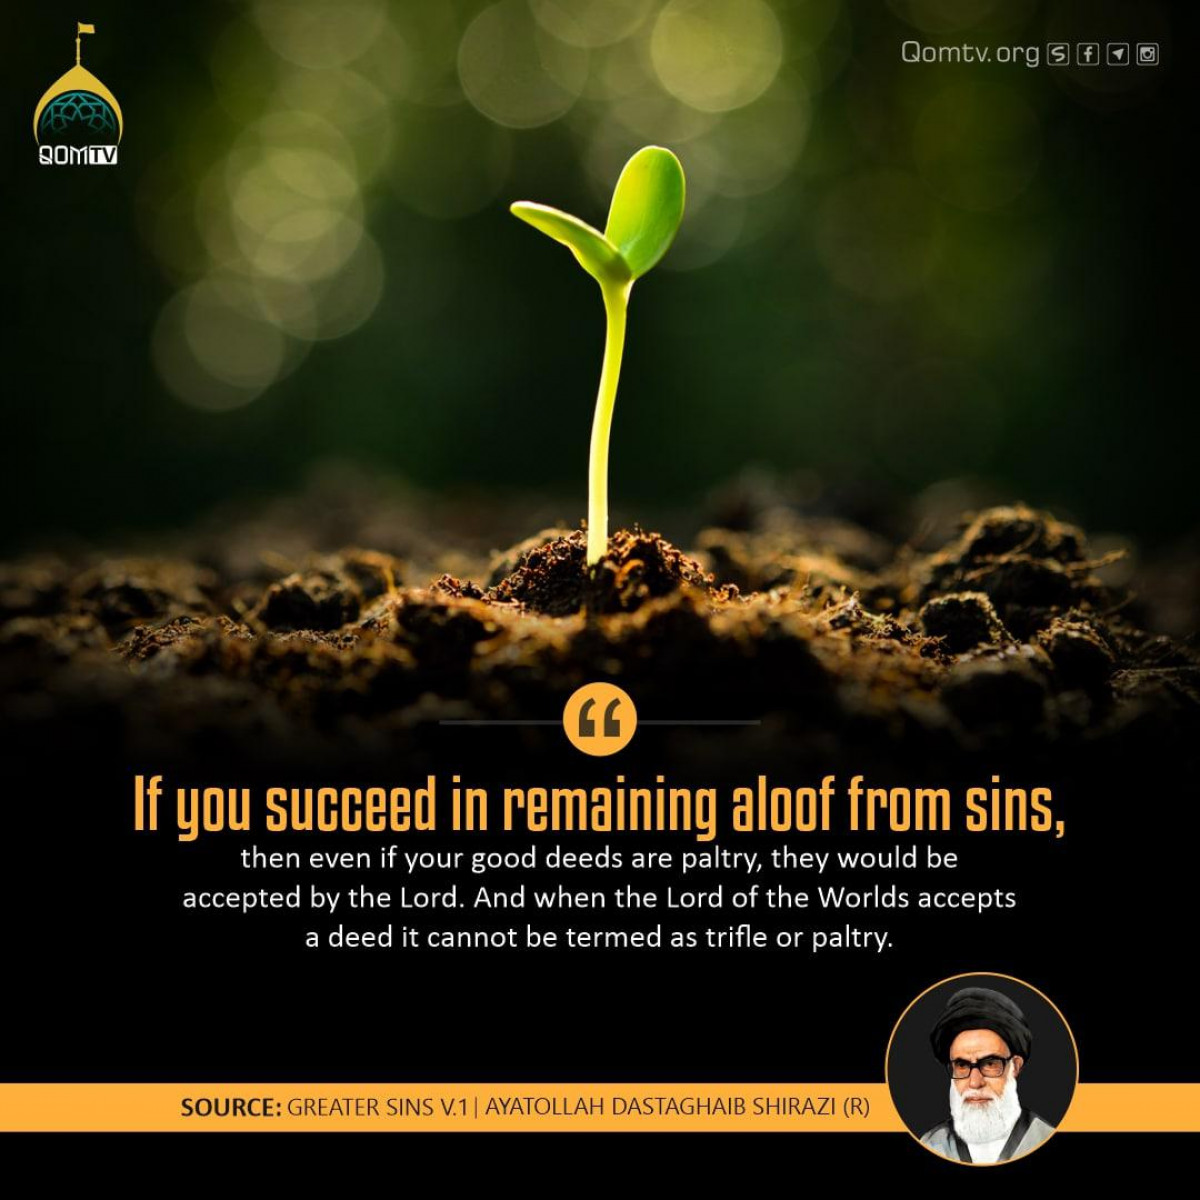 If you succeed in remaining aloof from sins